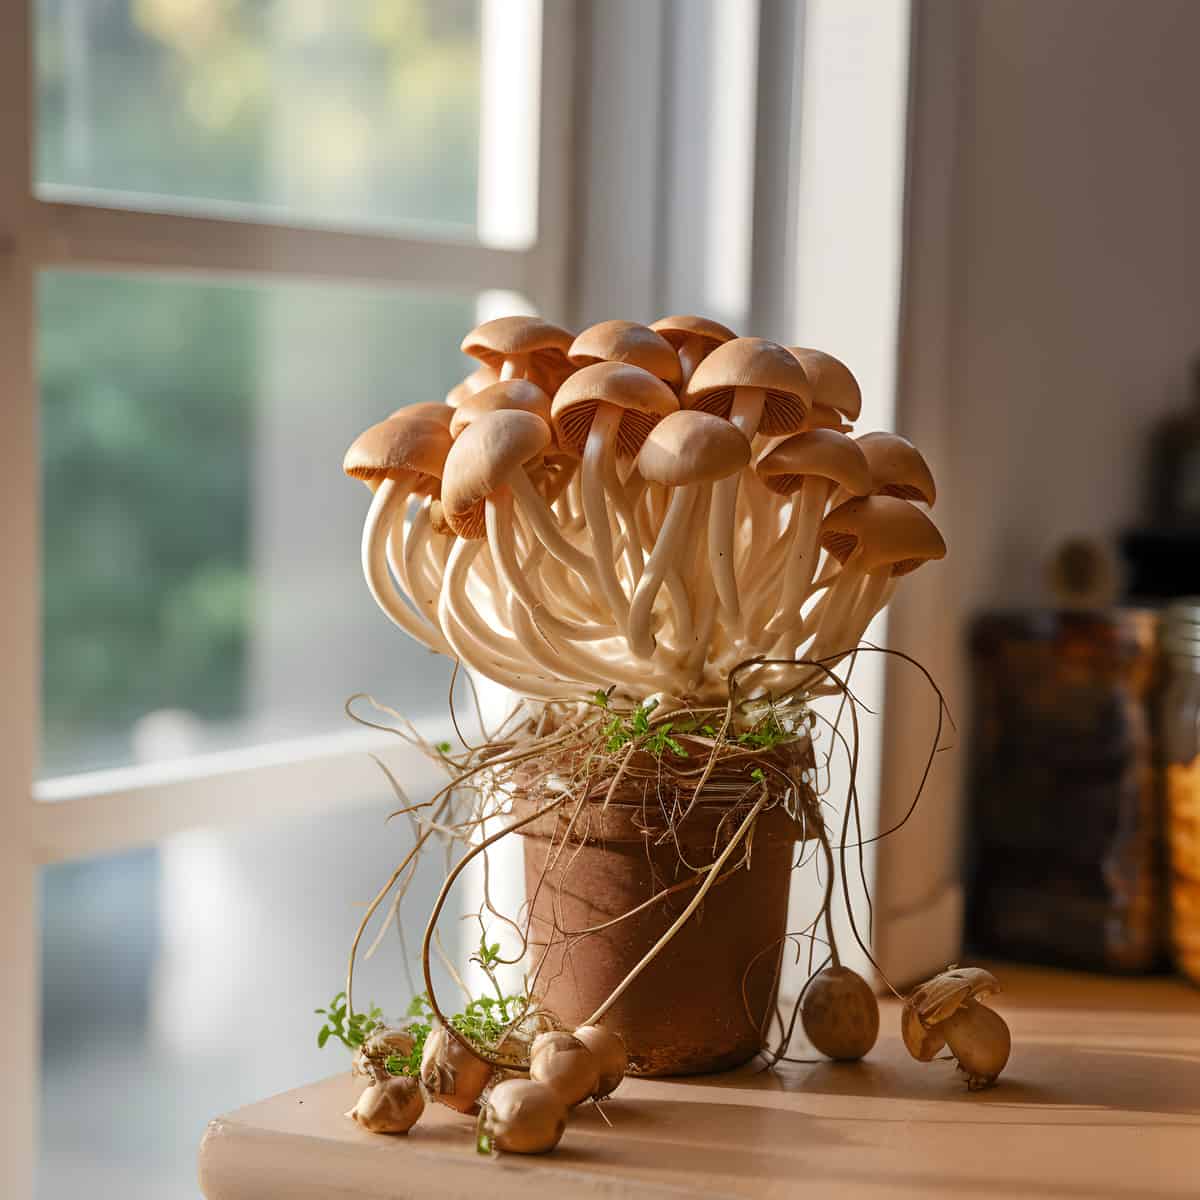 Paddy Straw Mushrooms on a kitchen counter